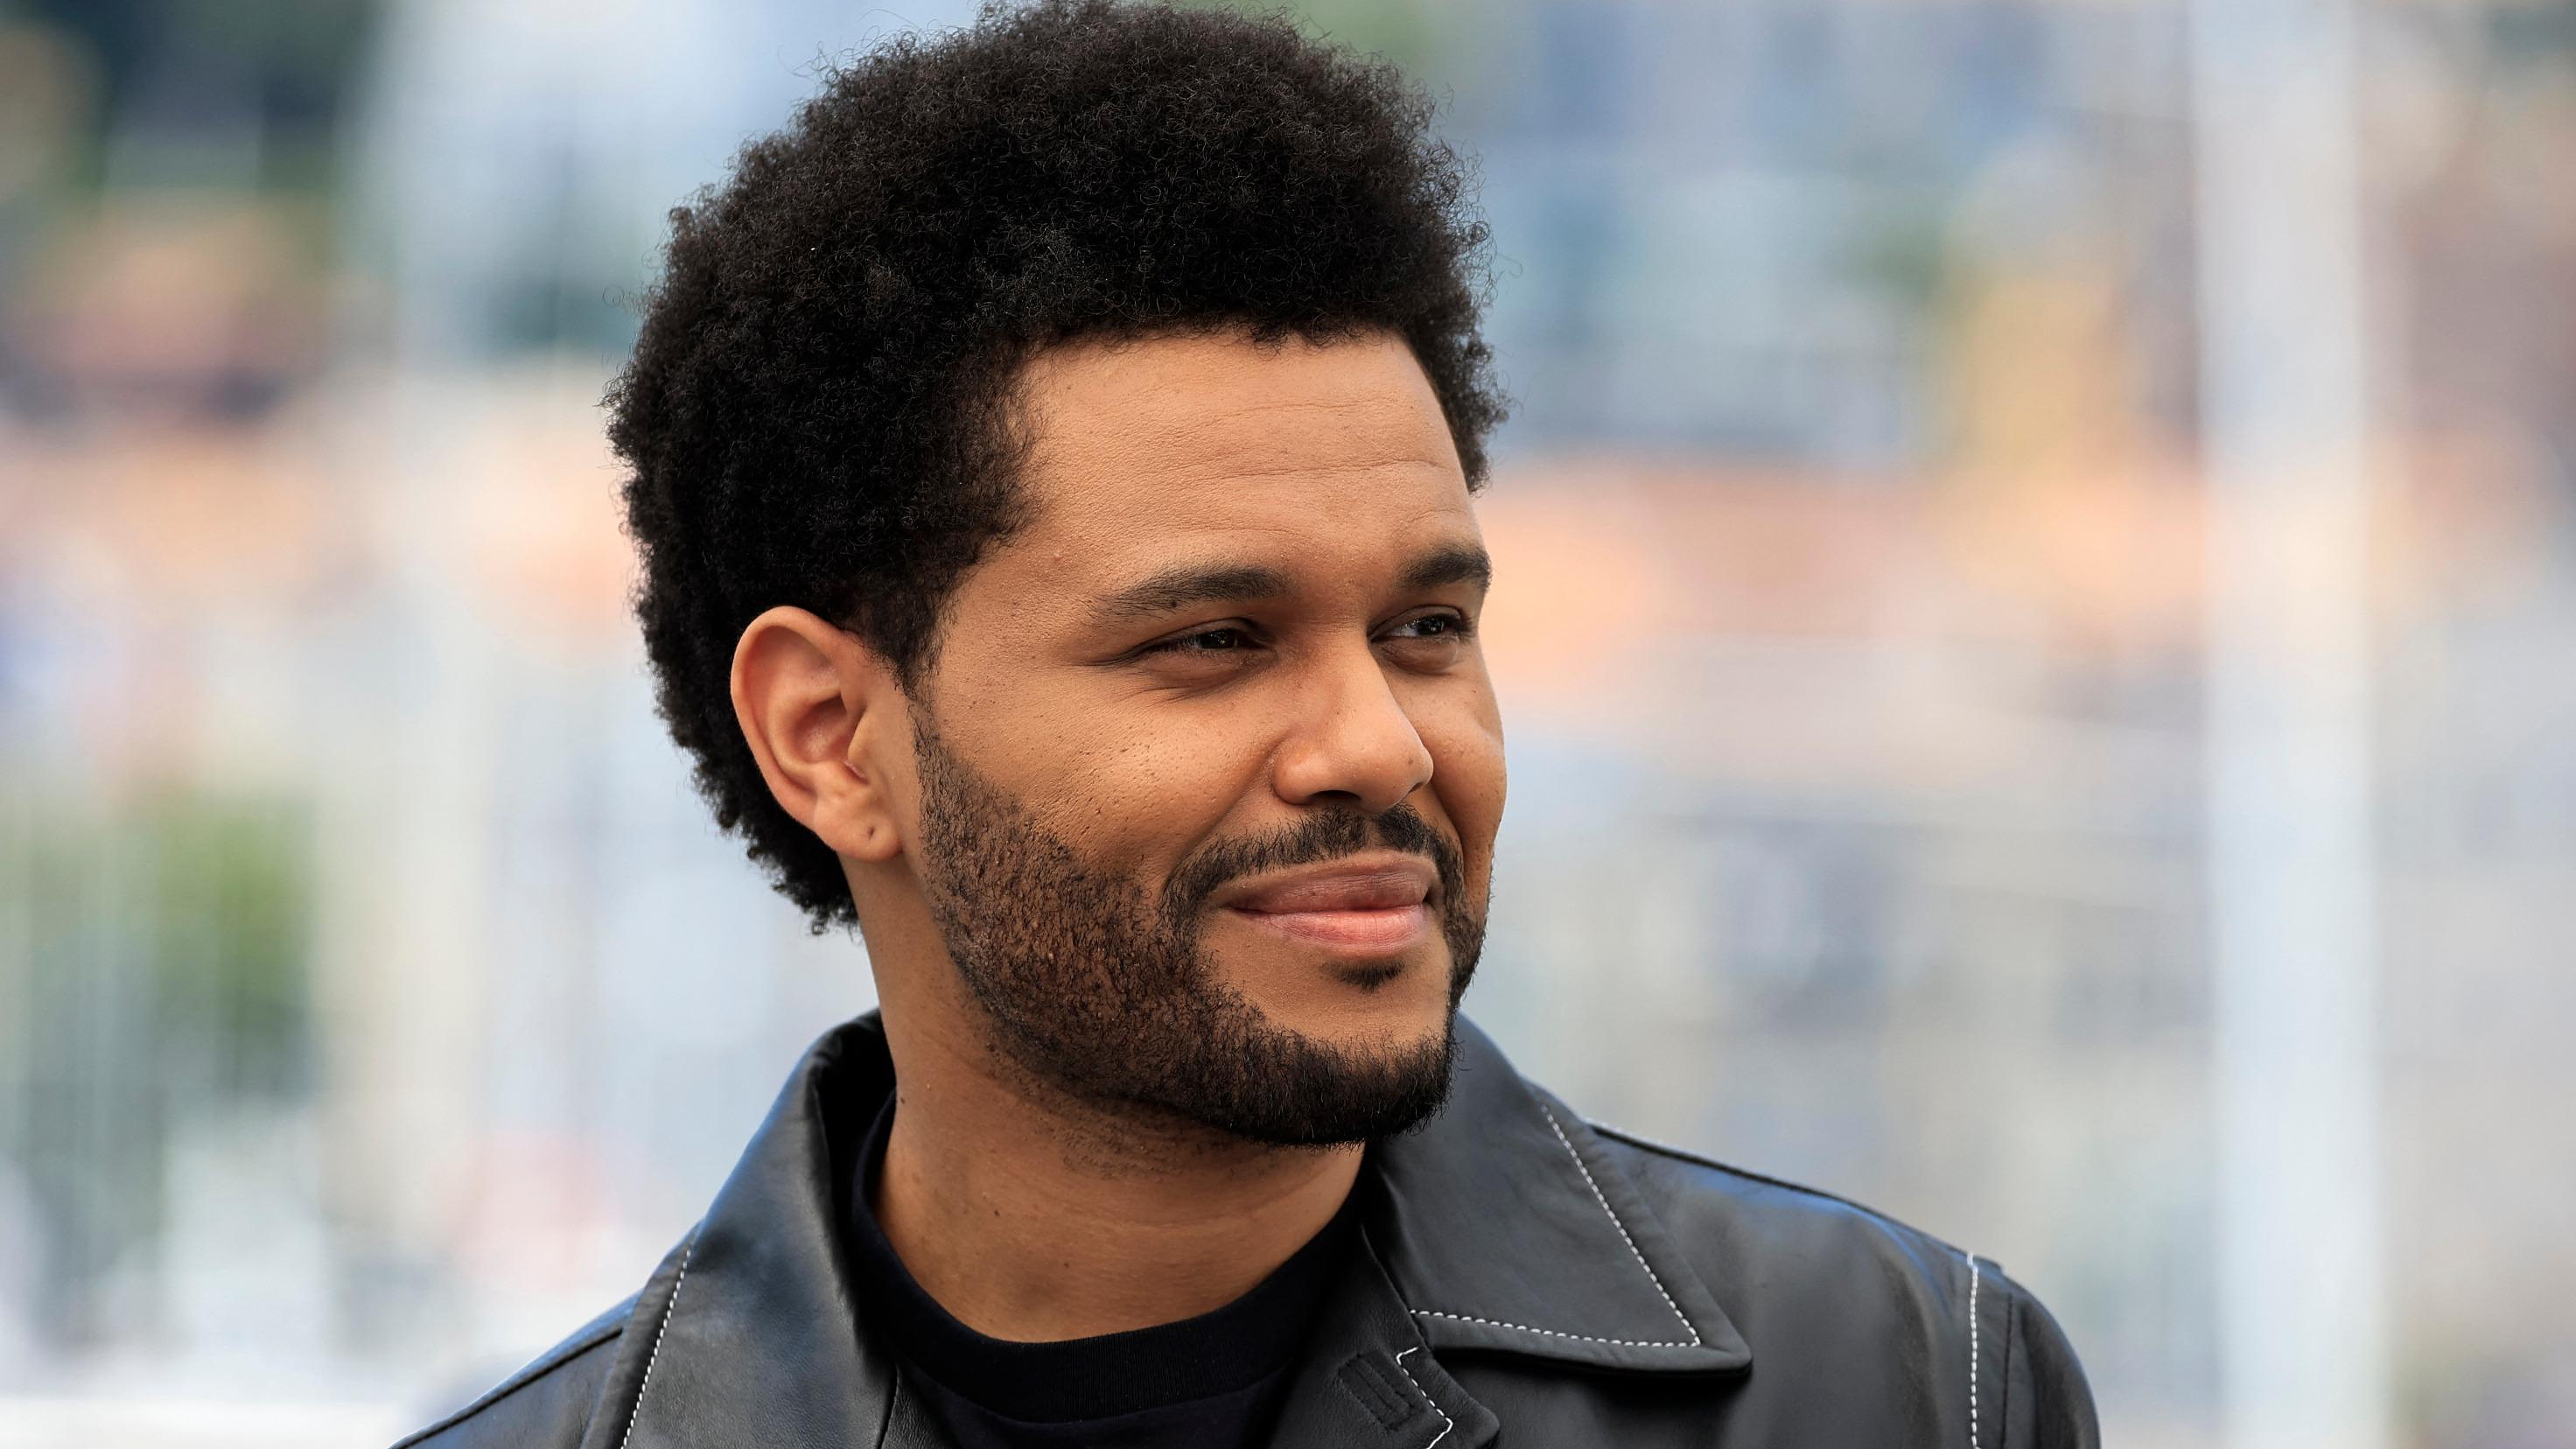 The Weeknd offers 1.8 million euros for supplies for Gaza residents